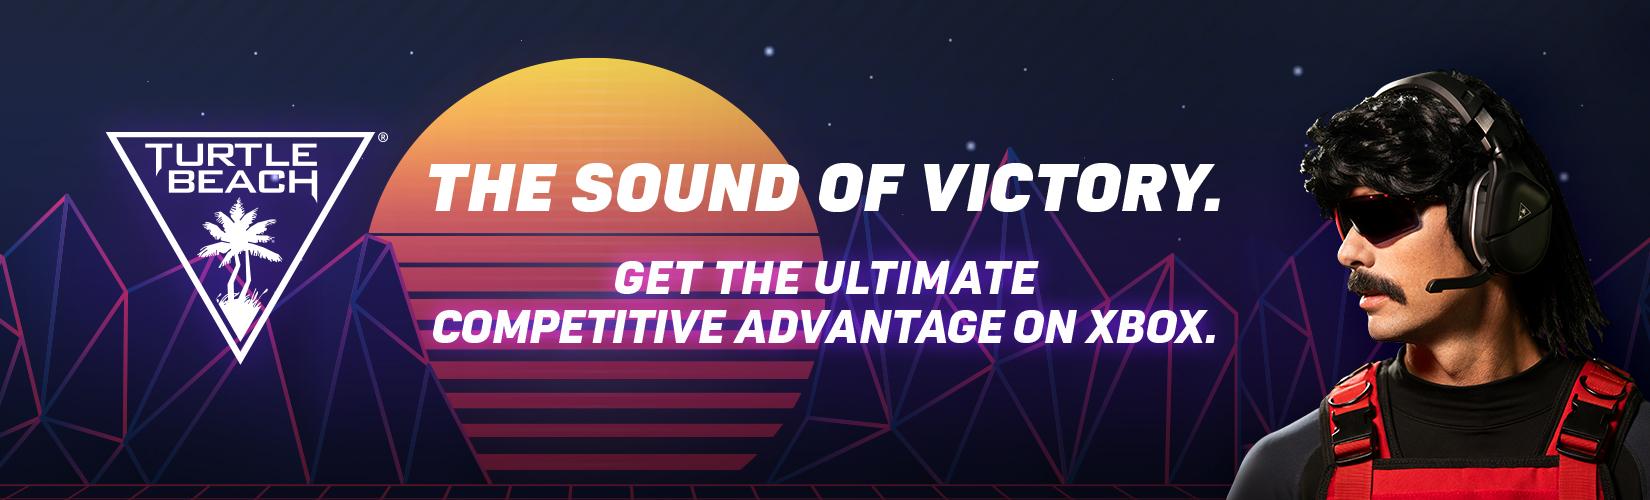 Turtle Beach. The sound of victory. Get the ultimate competitive advantage on Xbox.